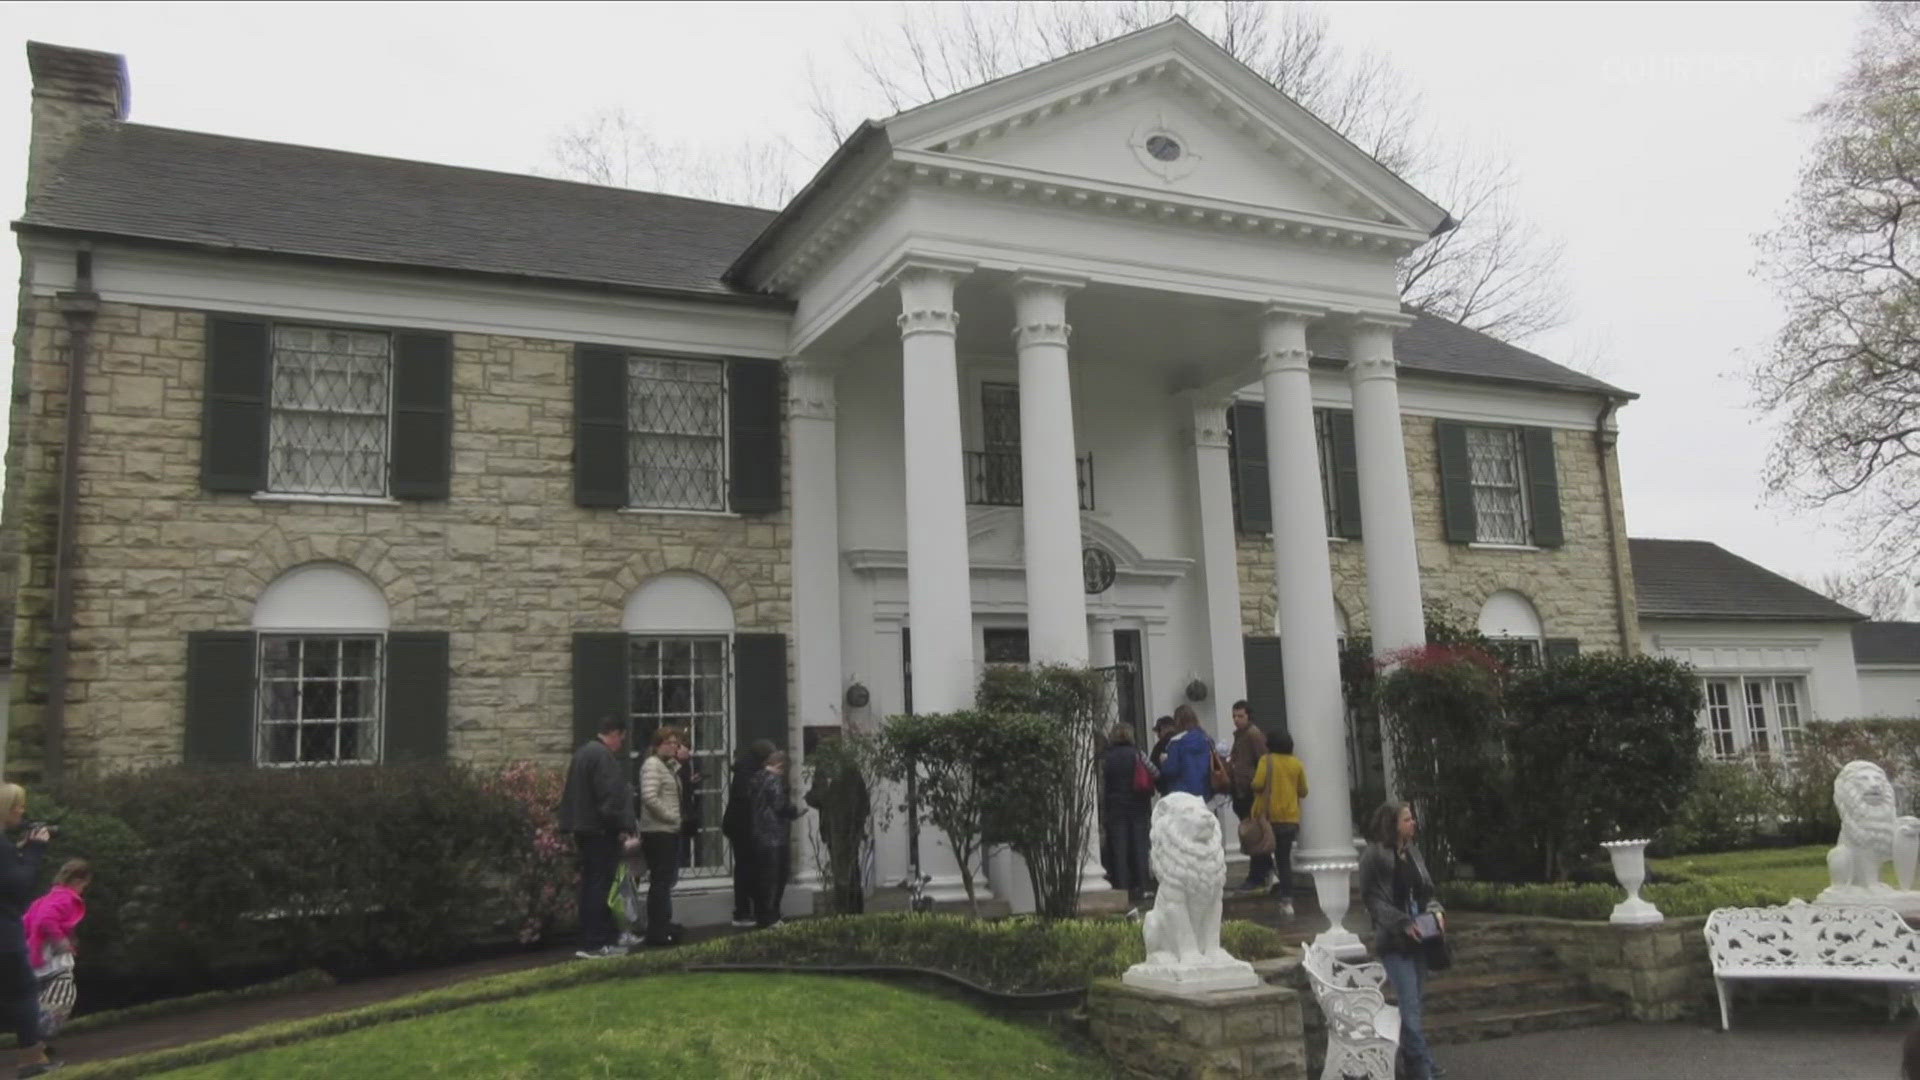 A company claims Lisa Marie Presley owed it millions of dollars and wants to force a sale of the famed Graceland mansion in Memphis to pay it off.